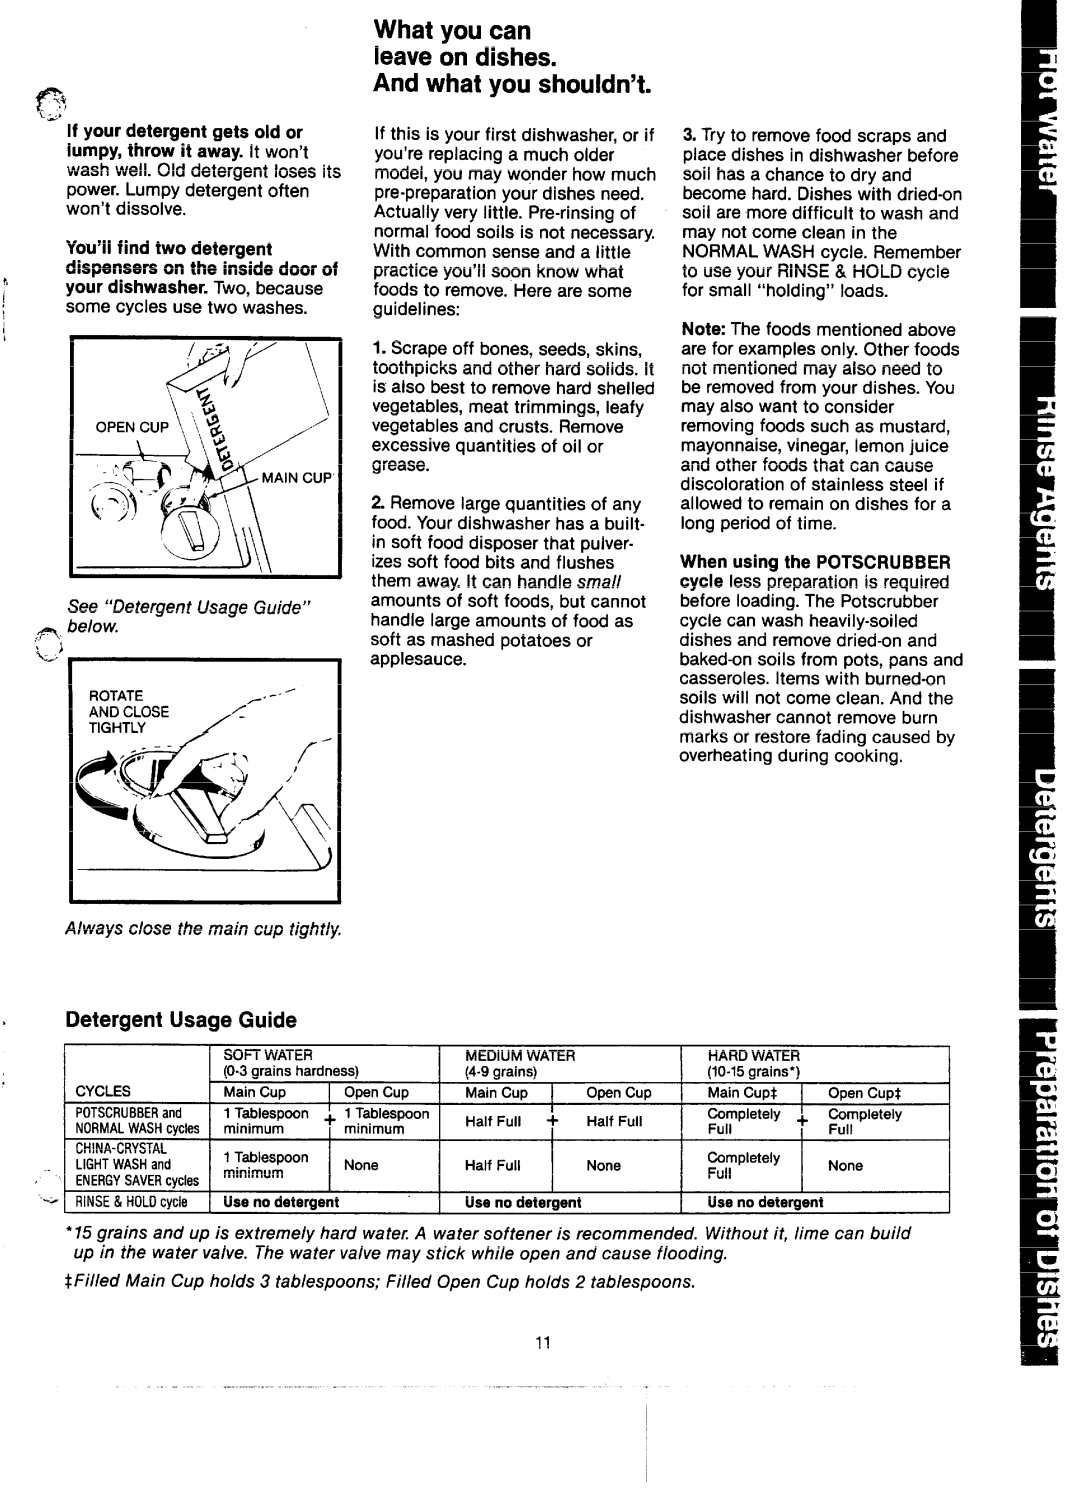 GE GSD2600D manual What you can leave on dishes, And what you shouldn’t, Detergent Usage Guide 